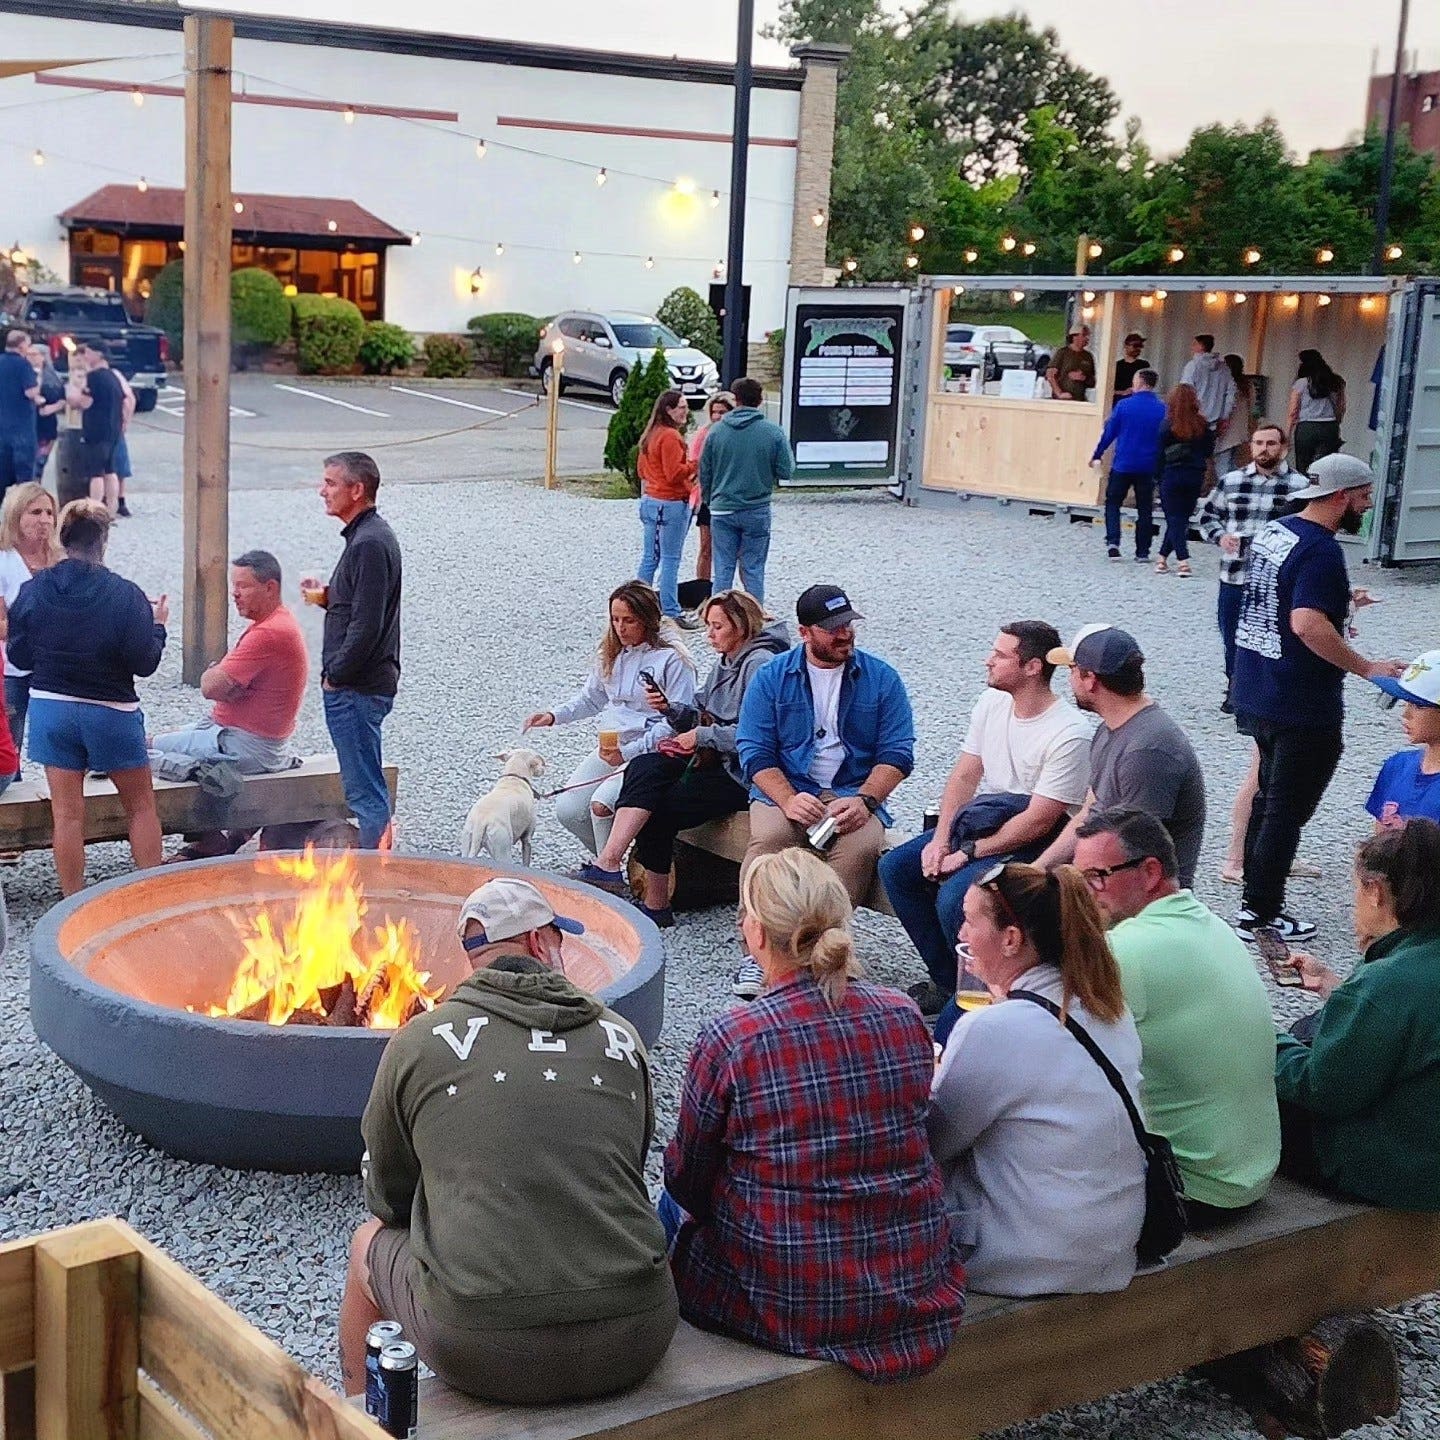 Braintree beer garden offers cold brews and hot food. Firepits and lawn games, too